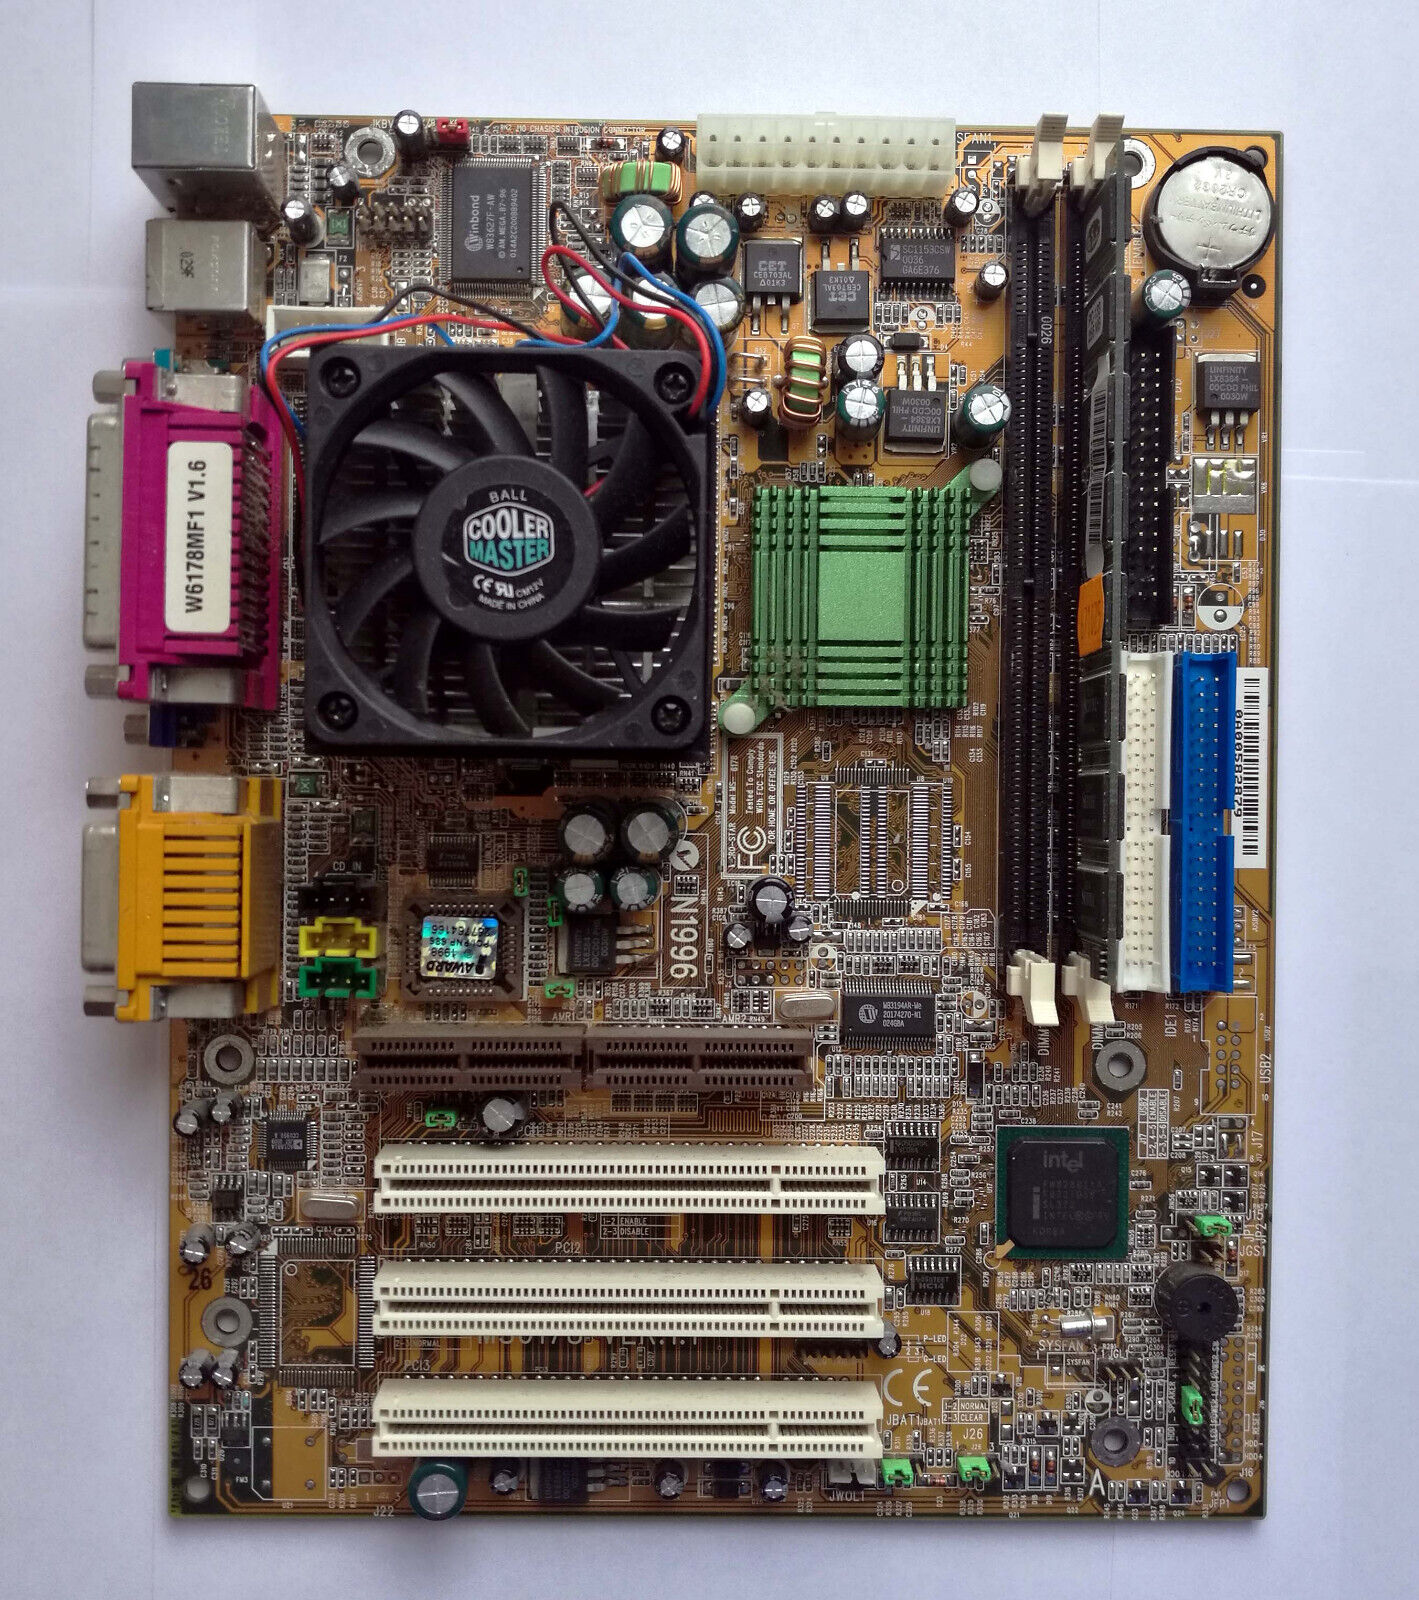 MSI MS-6178 Mobo with Celeron 900MHz CPU and 512MB RAM - Test OK